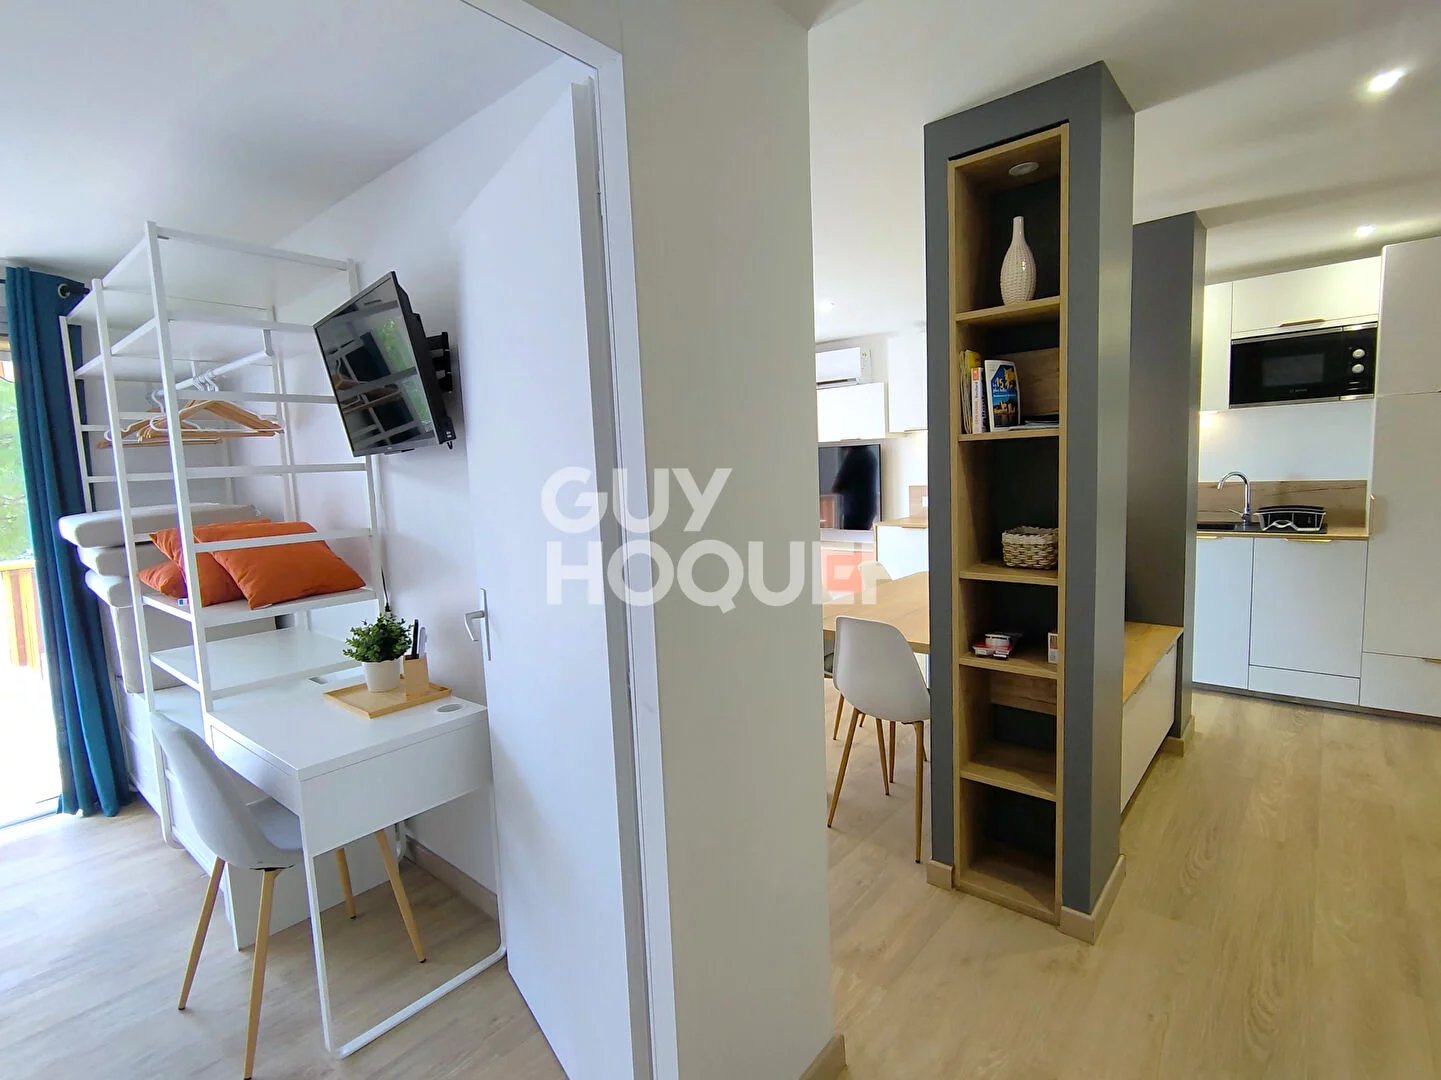 SUPERB FURNISHED 1 BEDROOM APARTMENT + BASEMENT BOX + SWIMMING POOL, CLOSE TO EVERYTHING ON FOOT (APARTMENT UNDER GLI READ THE ADVERTISING CAREFULLY THANK YOU)